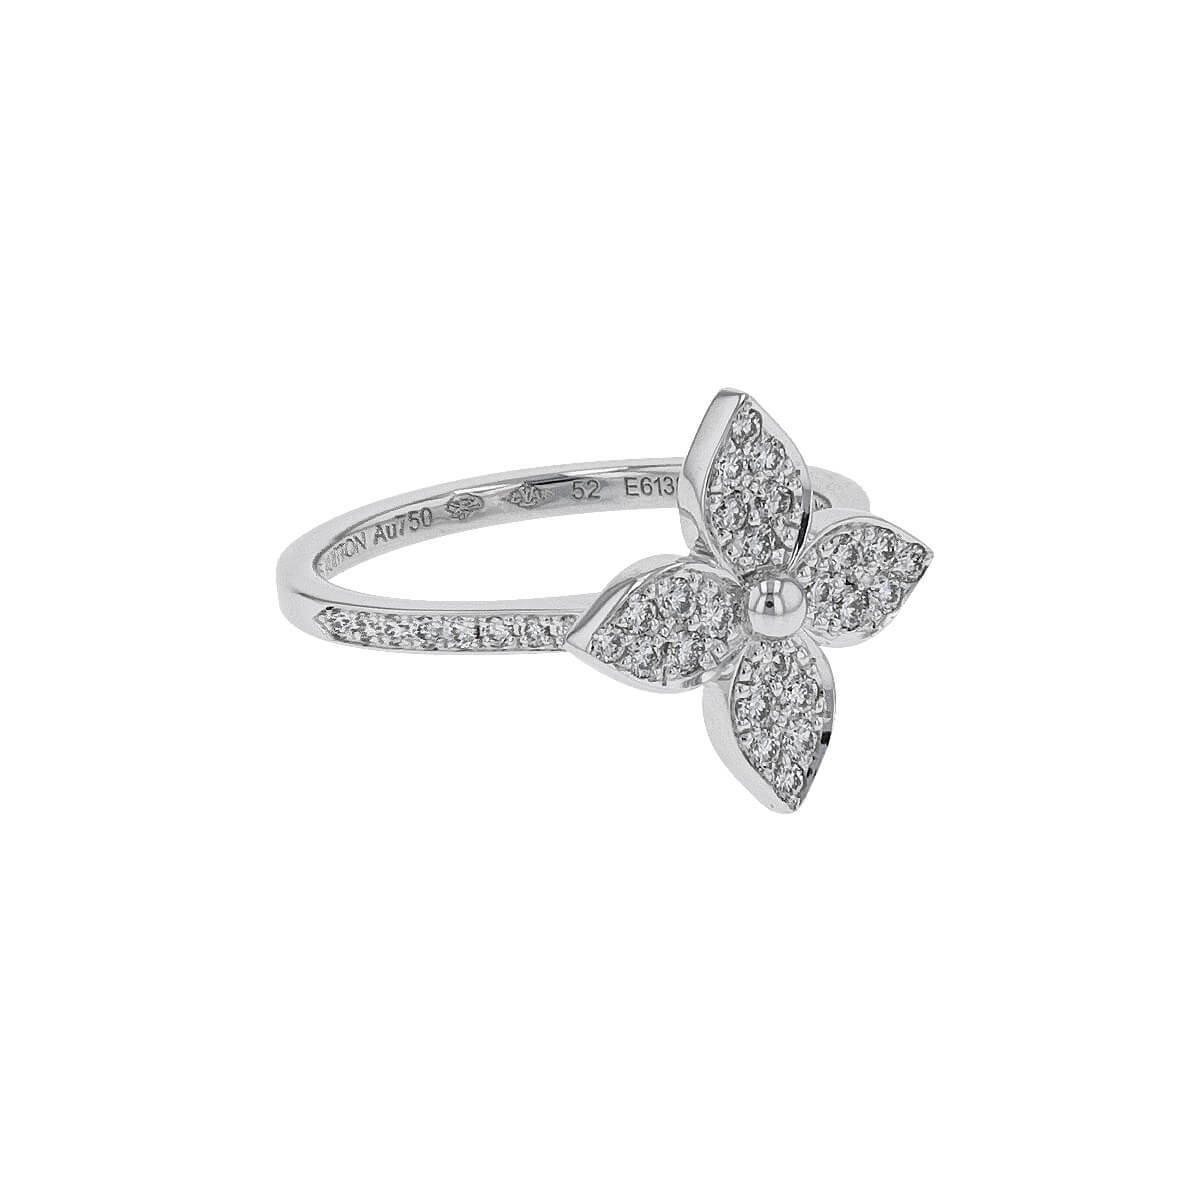 Louis Vuitton - Star Blossom Ring White Gold and Diamonds - Grey - Unisex - Size: 53 - Luxury